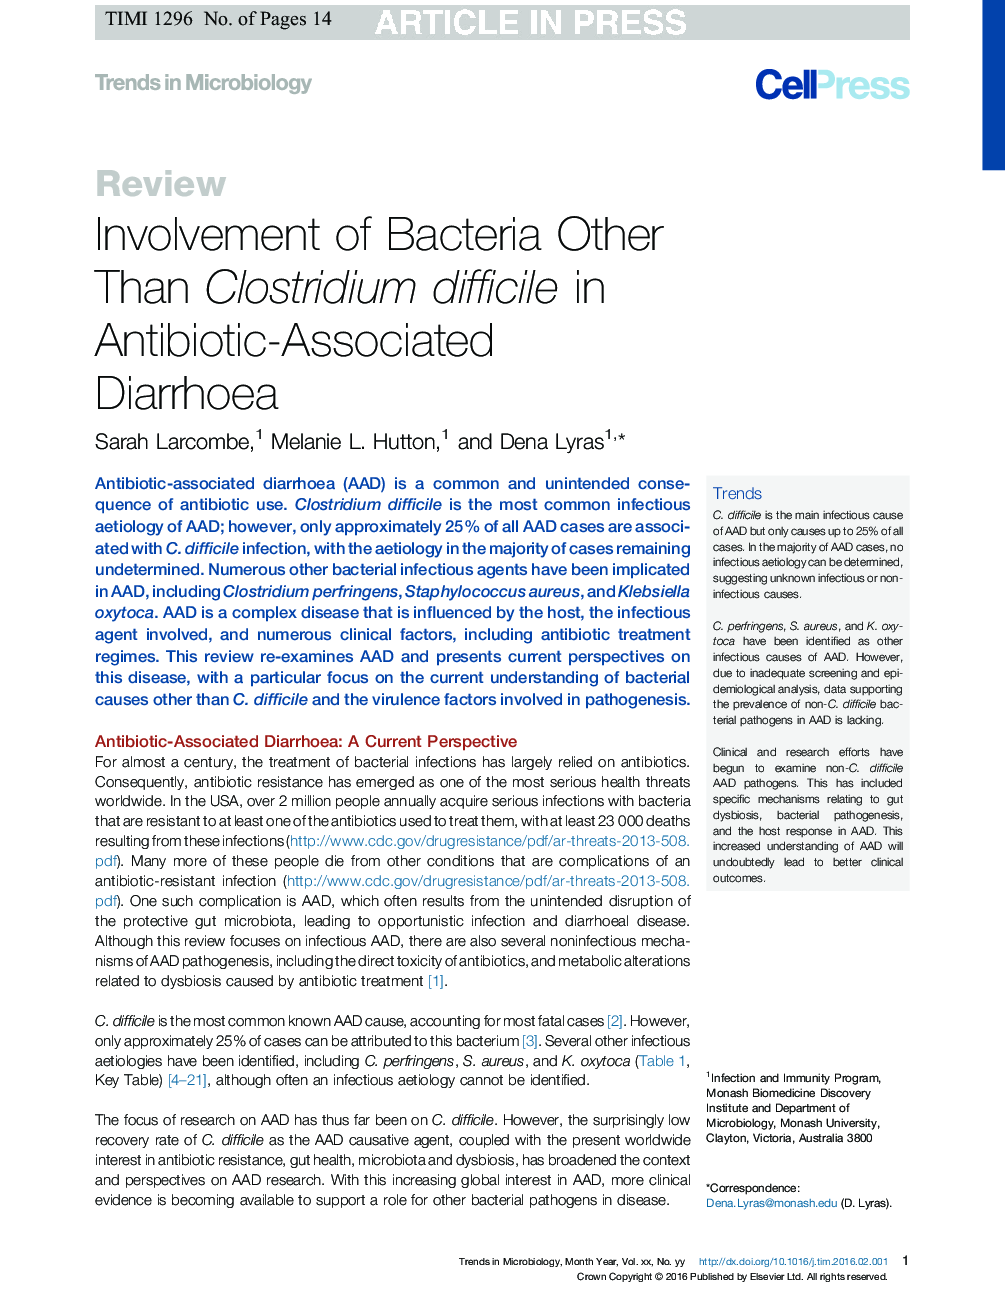 Involvement of Bacteria Other Than Clostridium difficile in Antibiotic-Associated Diarrhoea